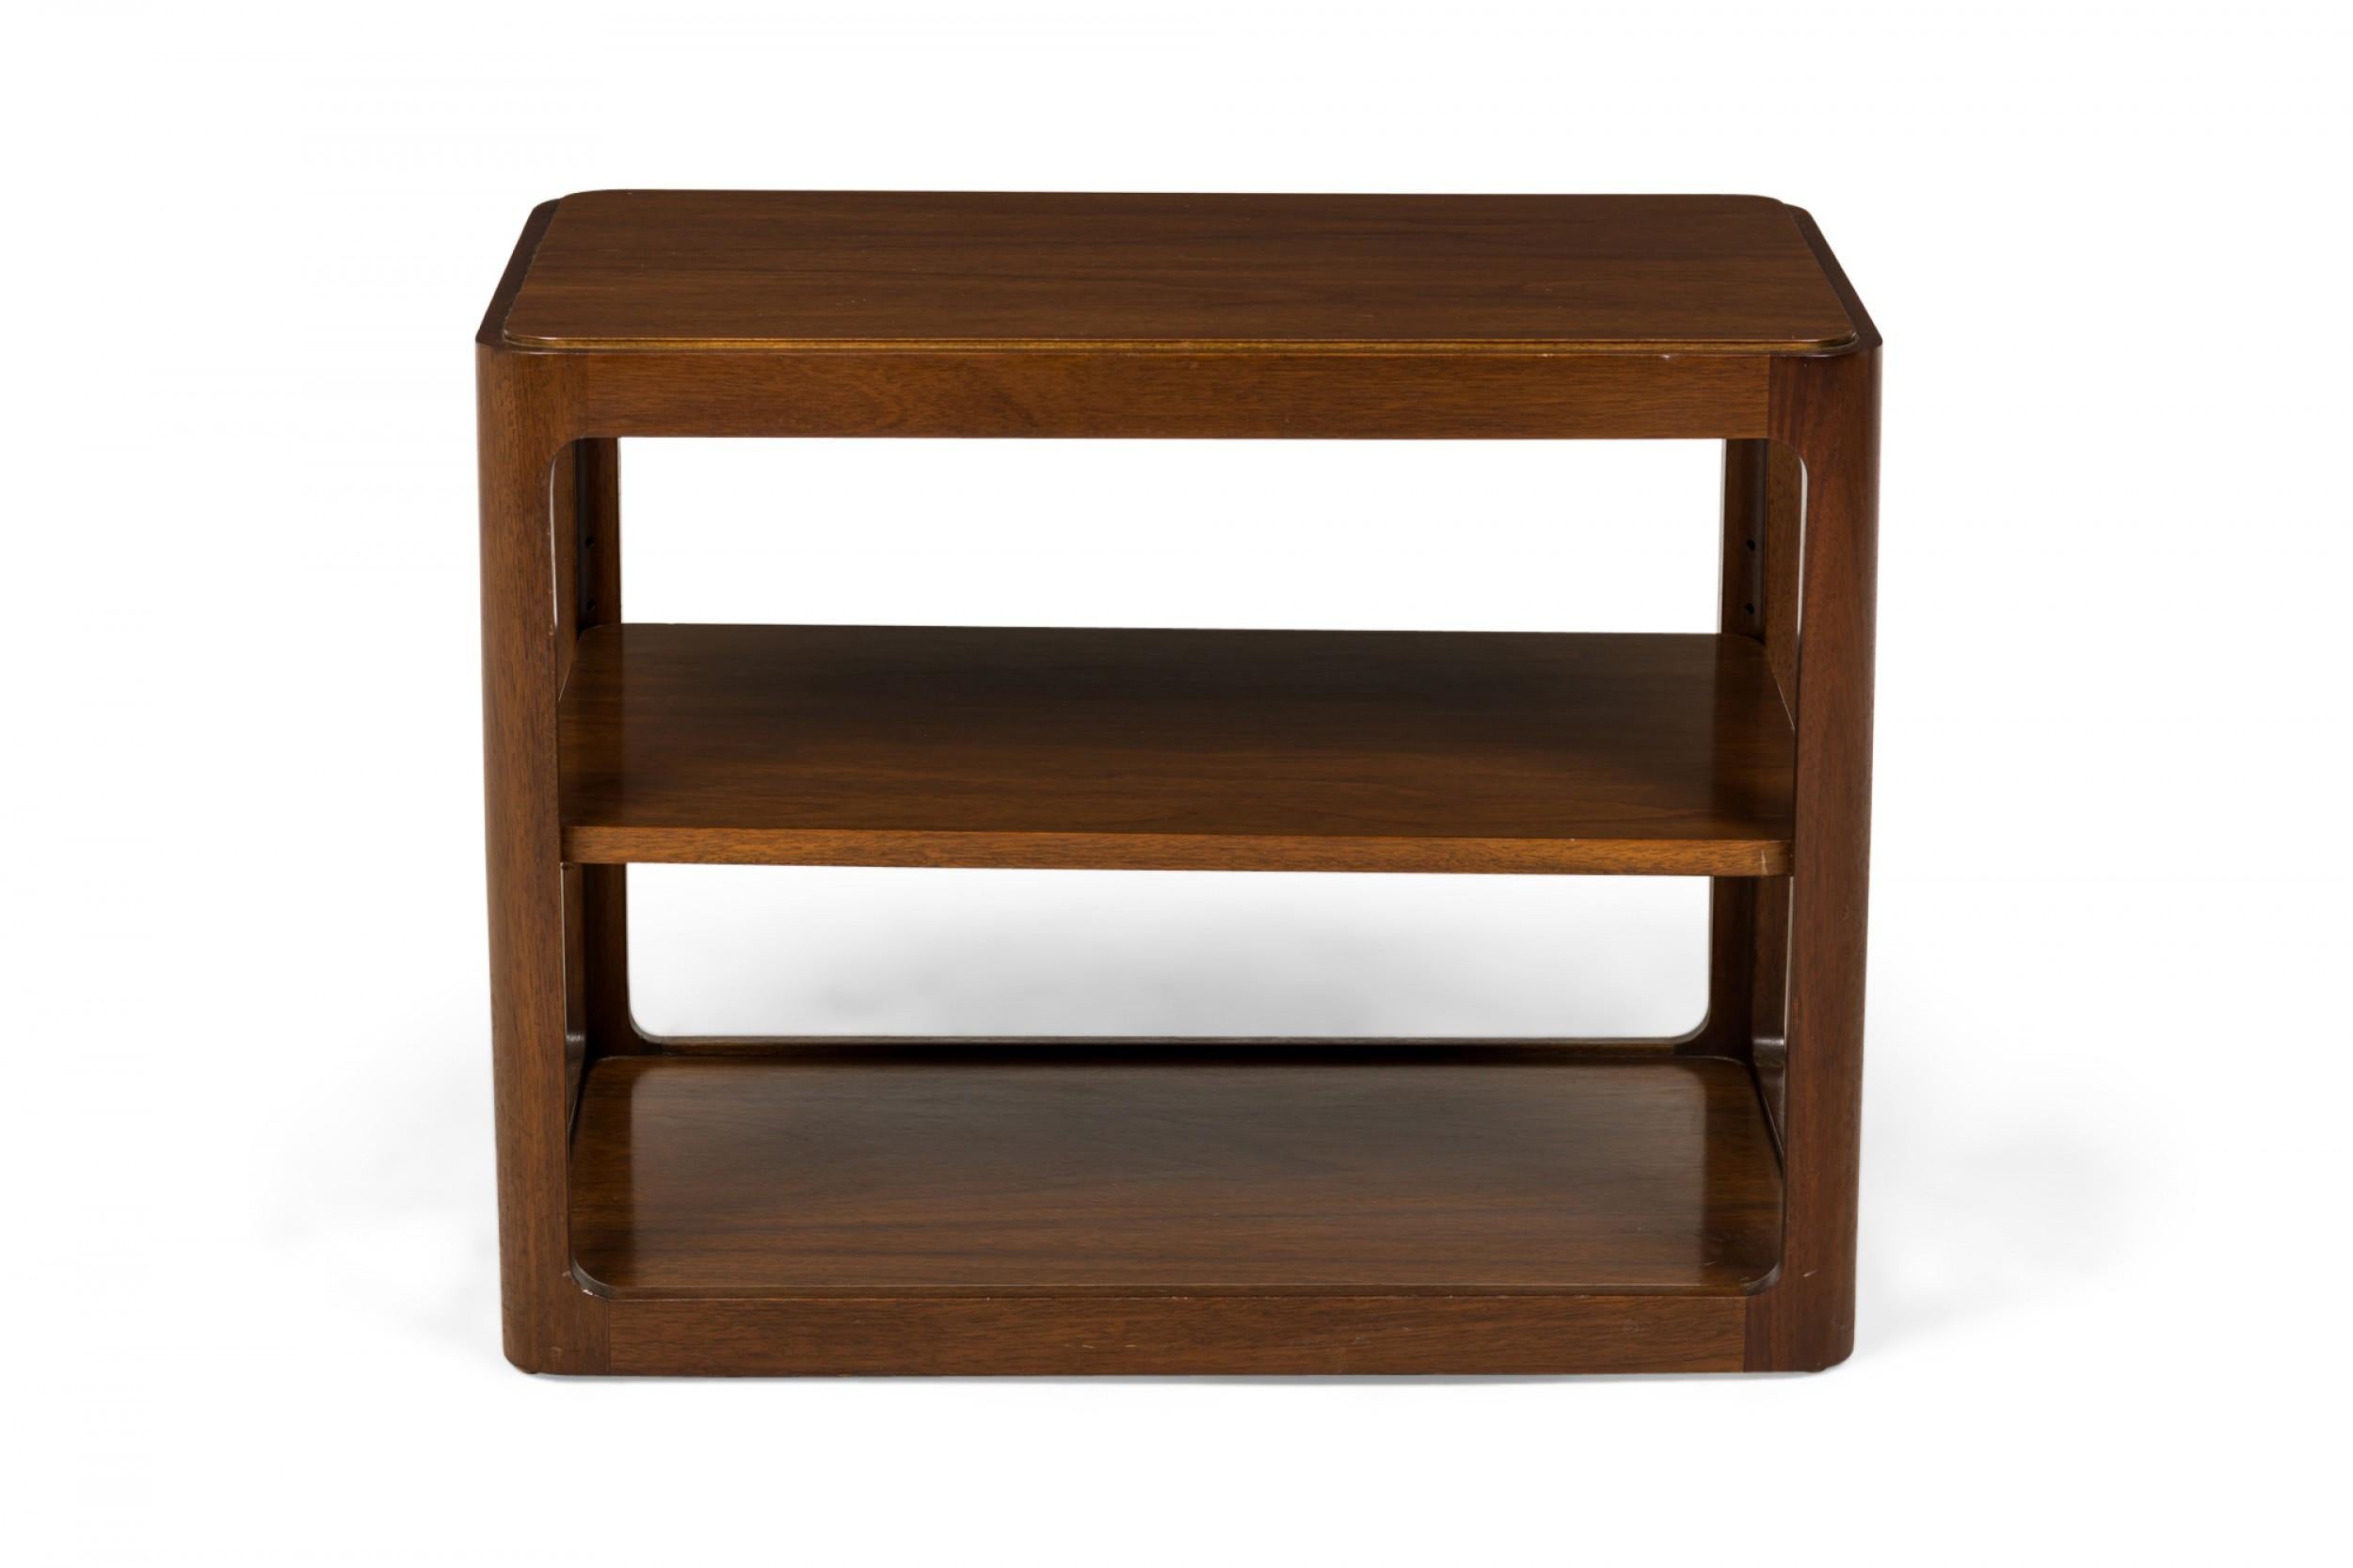 American Mid-Century 'Radius' form rectangular end / side table with a wooden frame, a slightly lighter raised wooden tabletop with rounded edges, and a middle stretcher shelf, resting on a solid base that creates and additional lower open